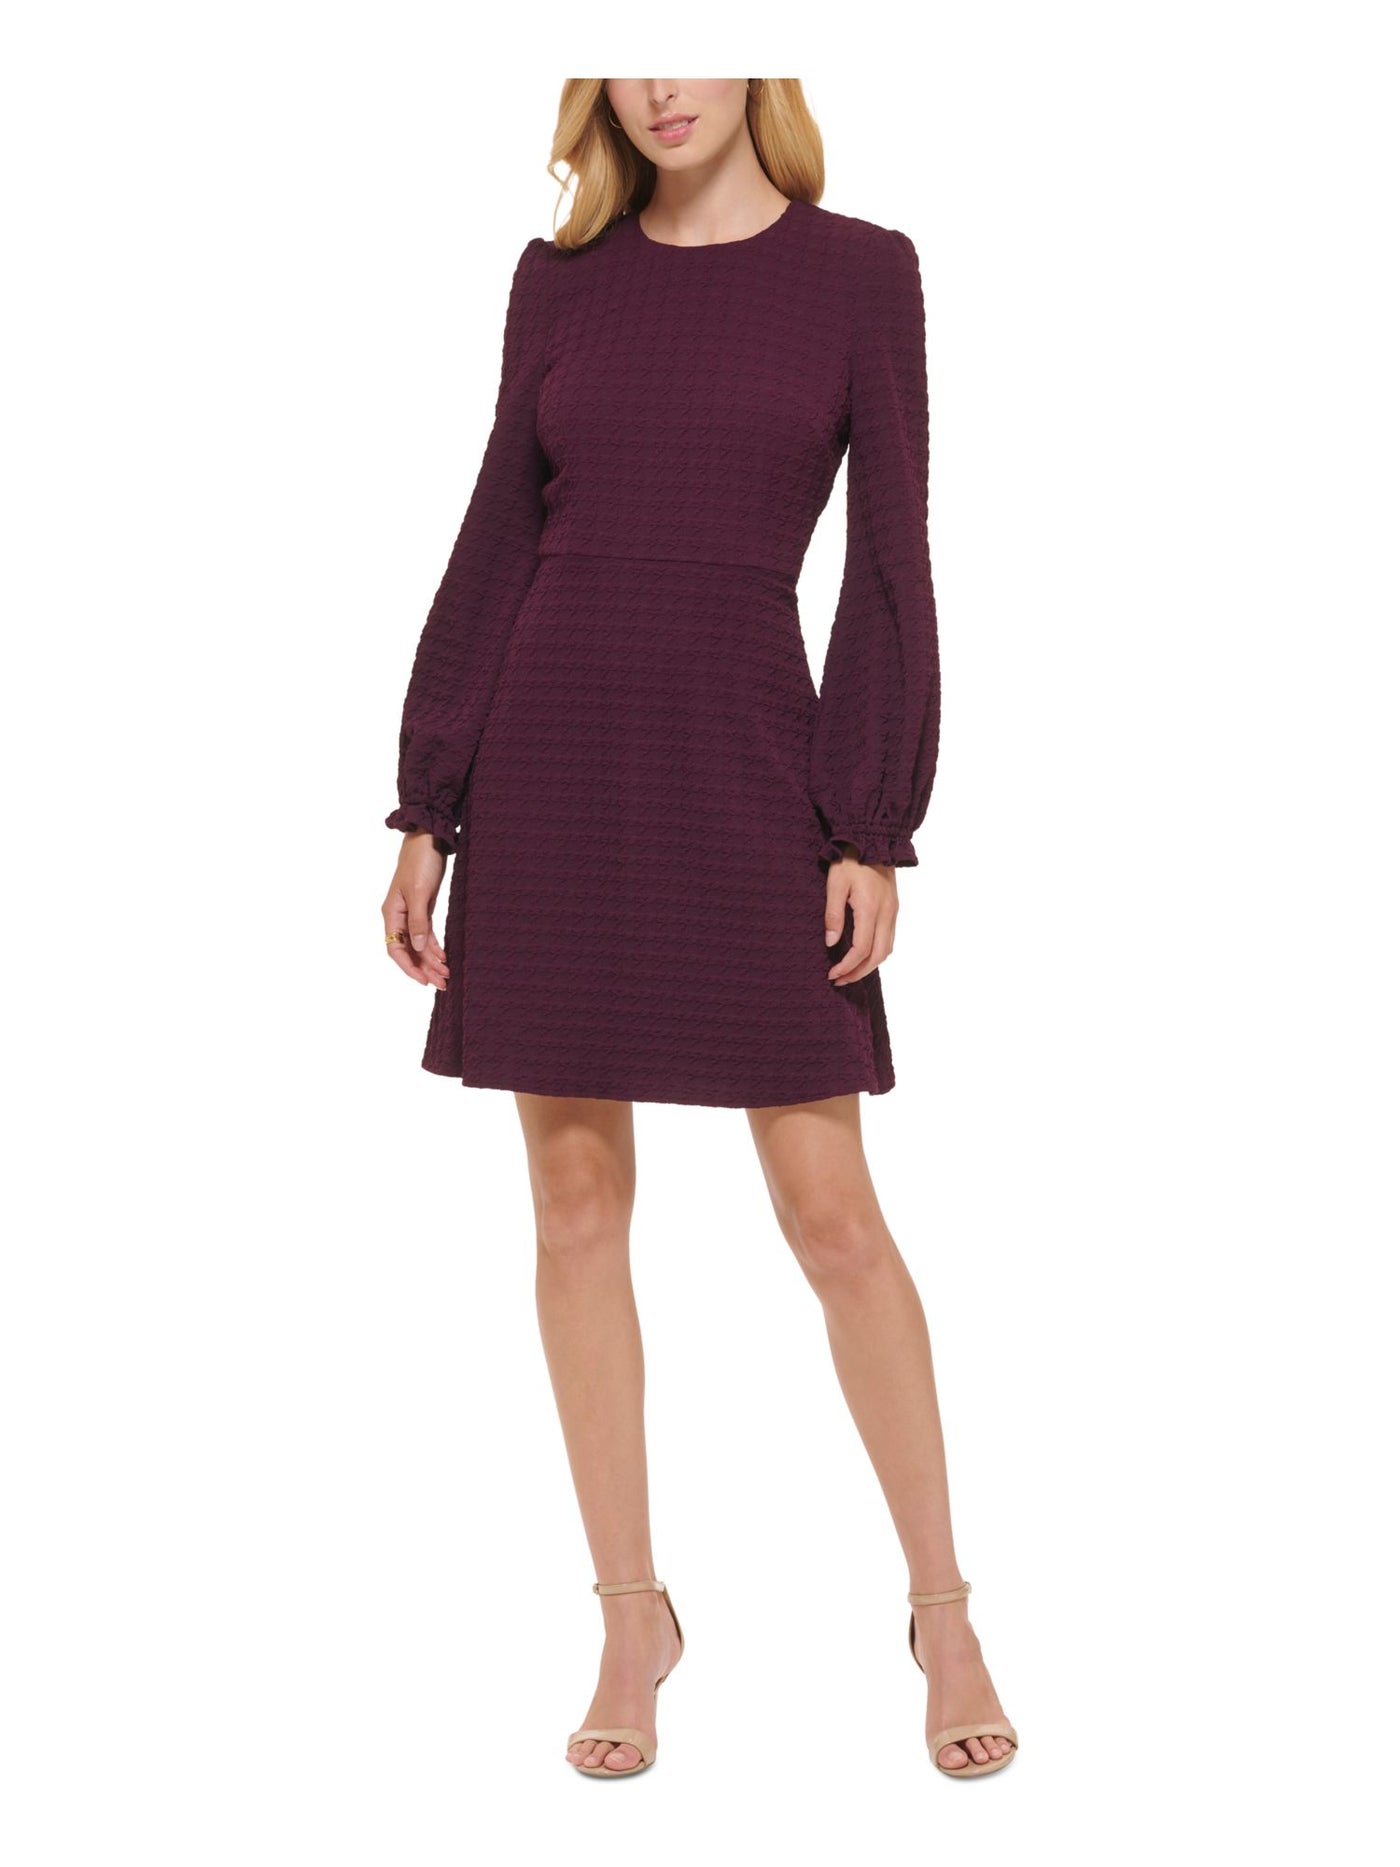 TOMMY HILFIGER Womens Purple Zippered Unlined Ruffled Textured Darted Houndstooth Long Sleeve Round Neck Above The Knee Wear To Work Fit + Flare Dress Petites 4P